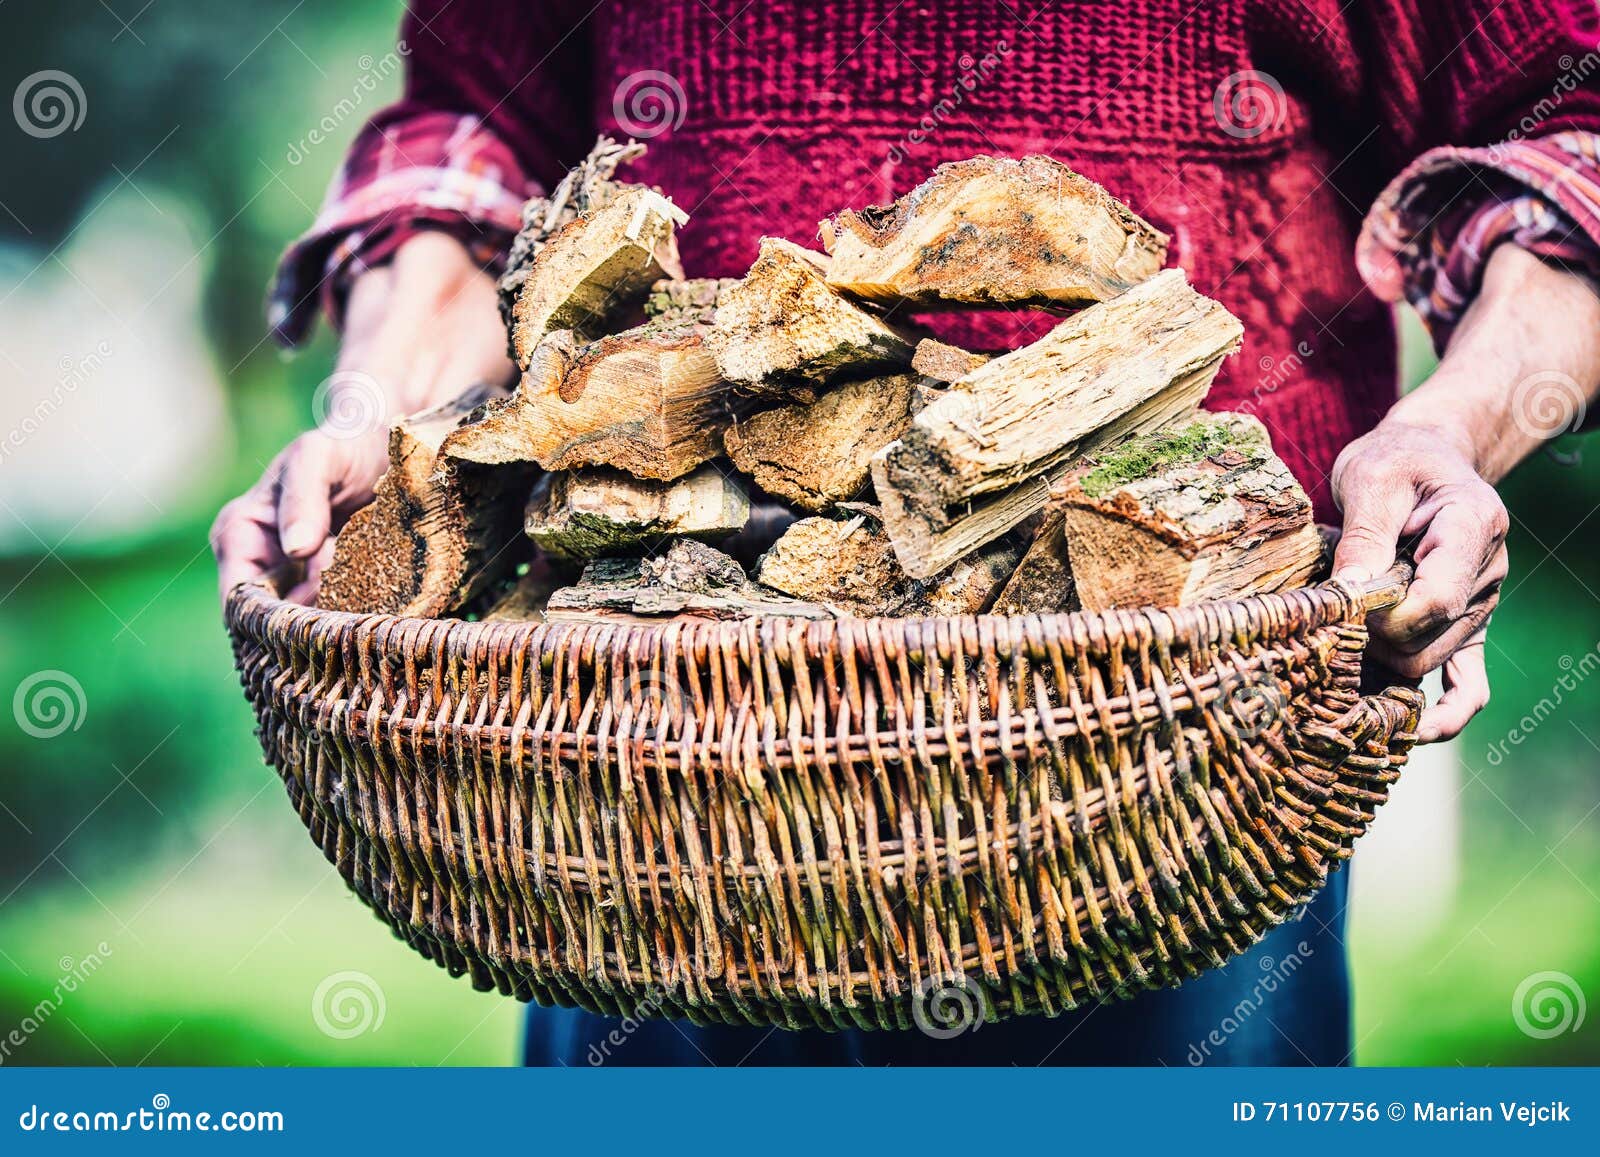 pensioner farmer holding basket full of firewood. man senior holding wood out of a basket to ignite the fireplace